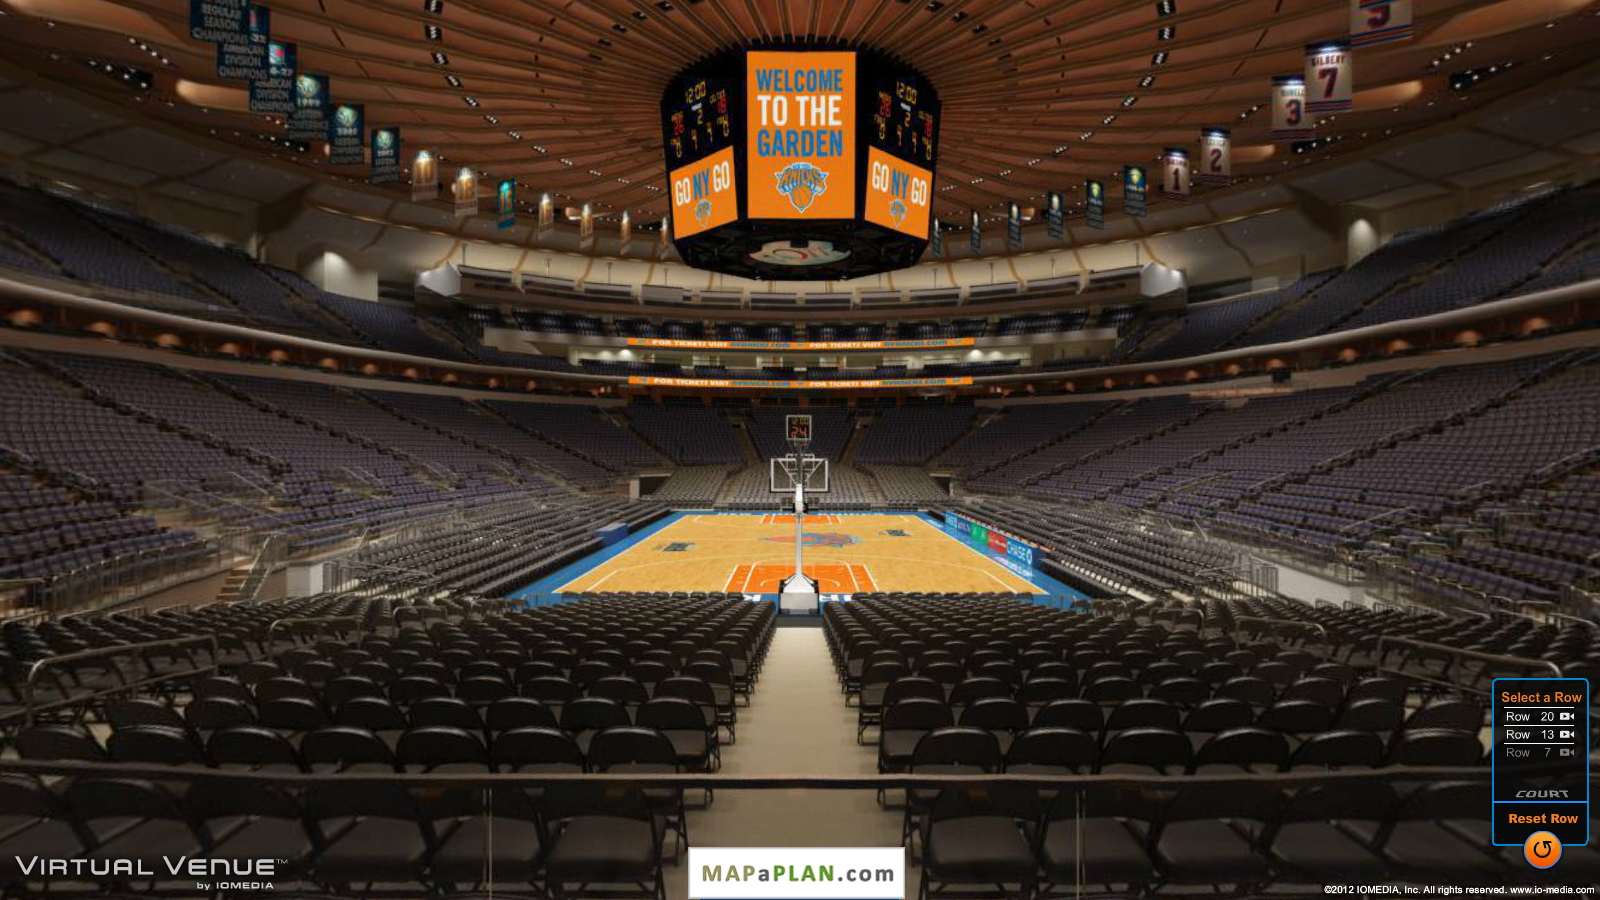 Madison square garden seating chart View from section 102